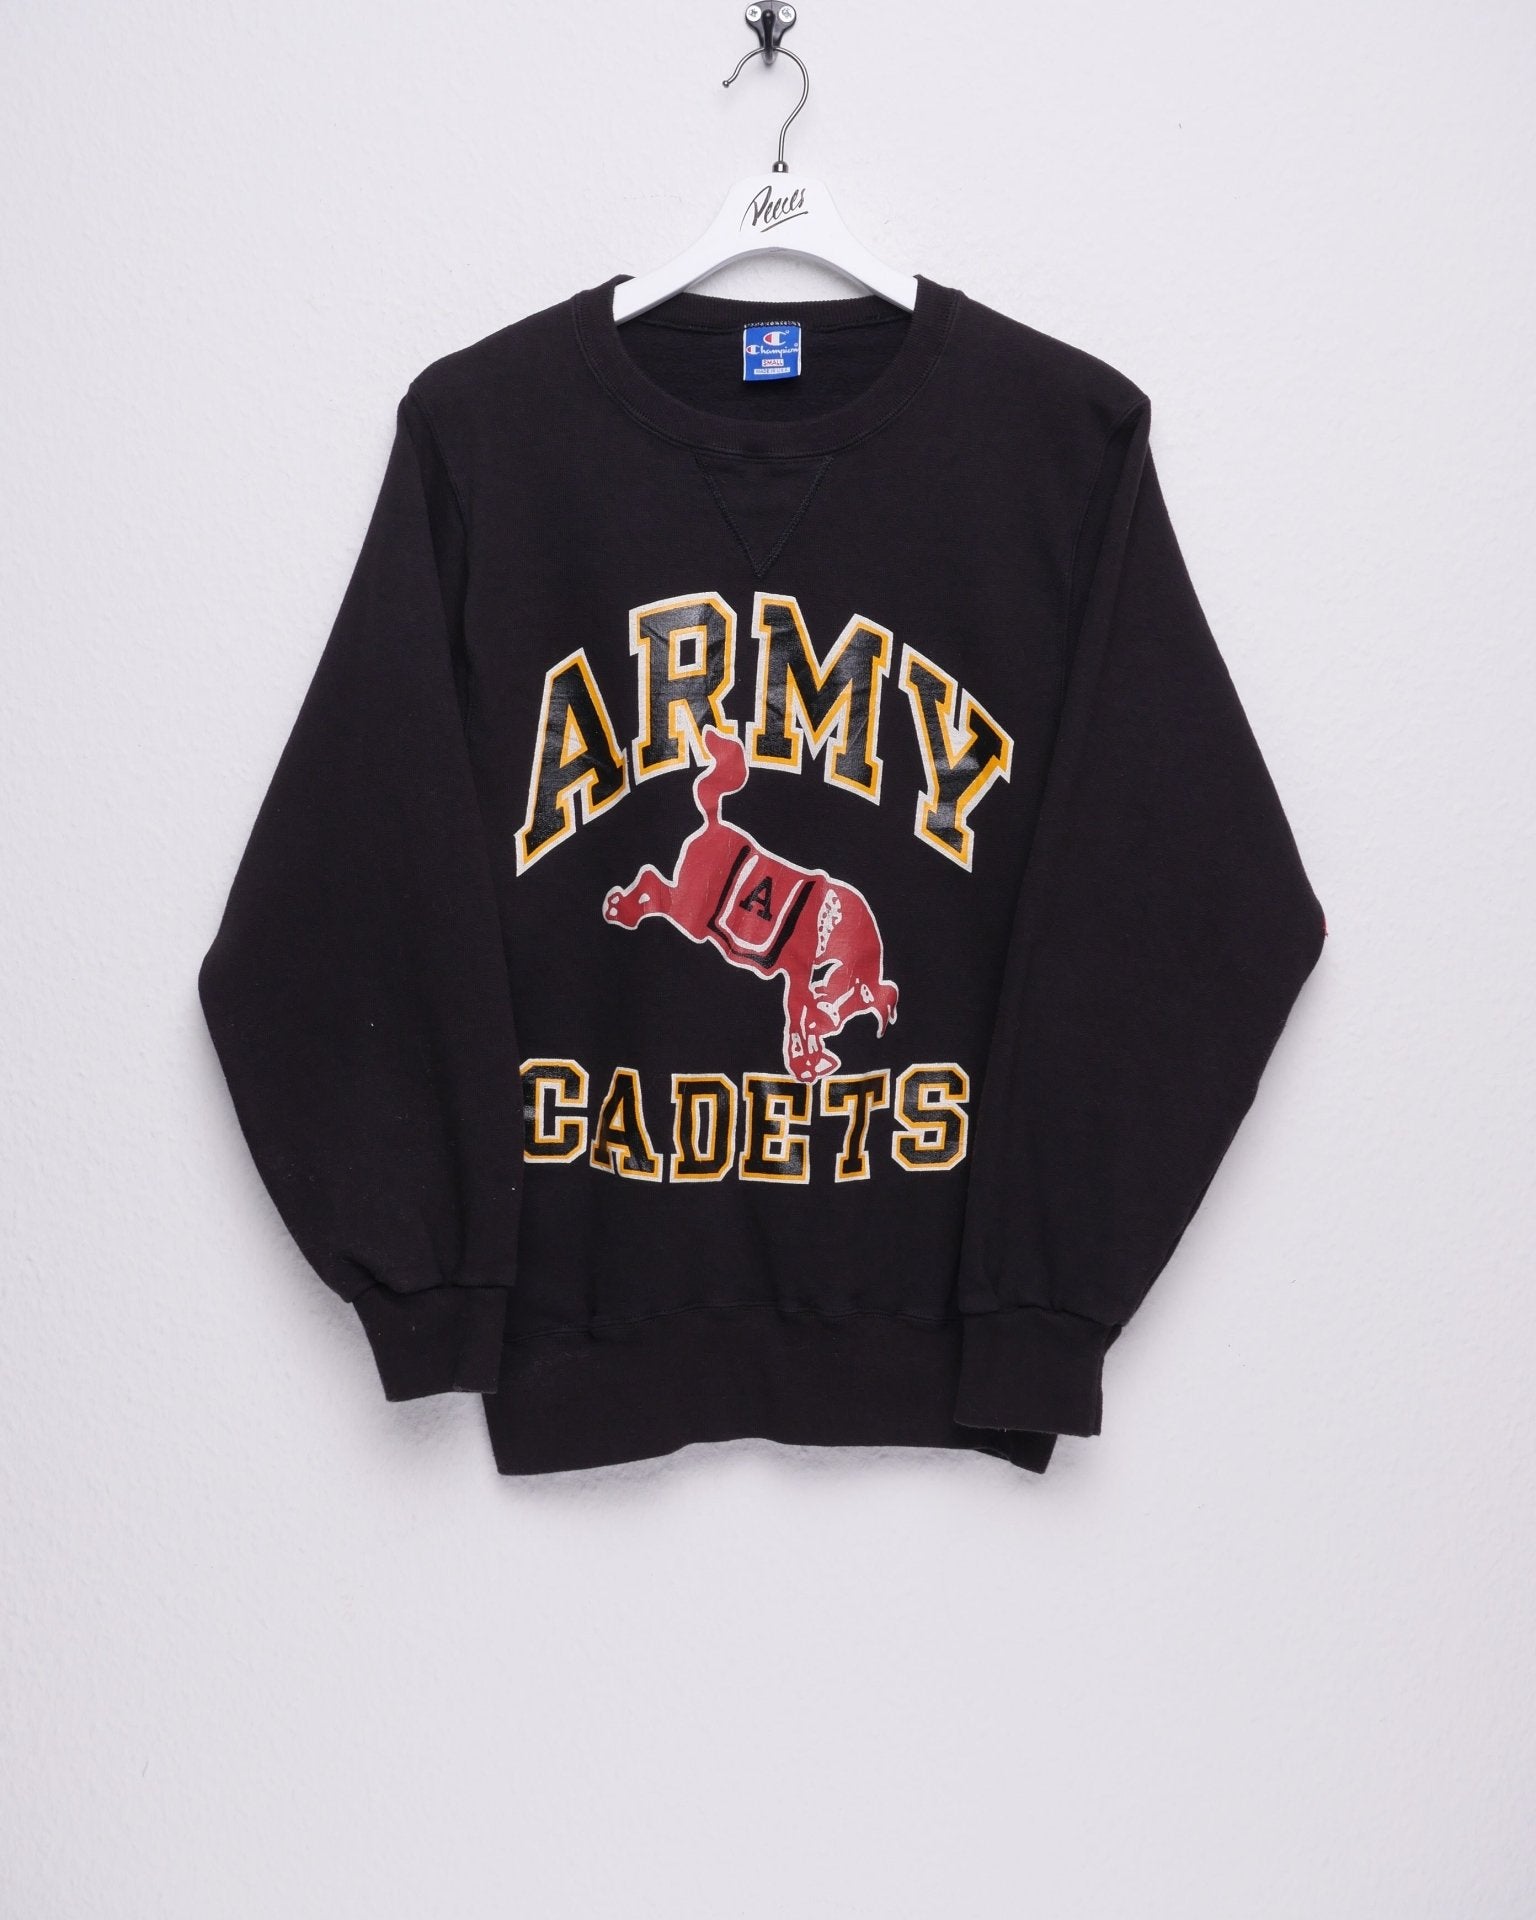 Champion 'Army Gadets' printed Graphic black Sweater - Peeces